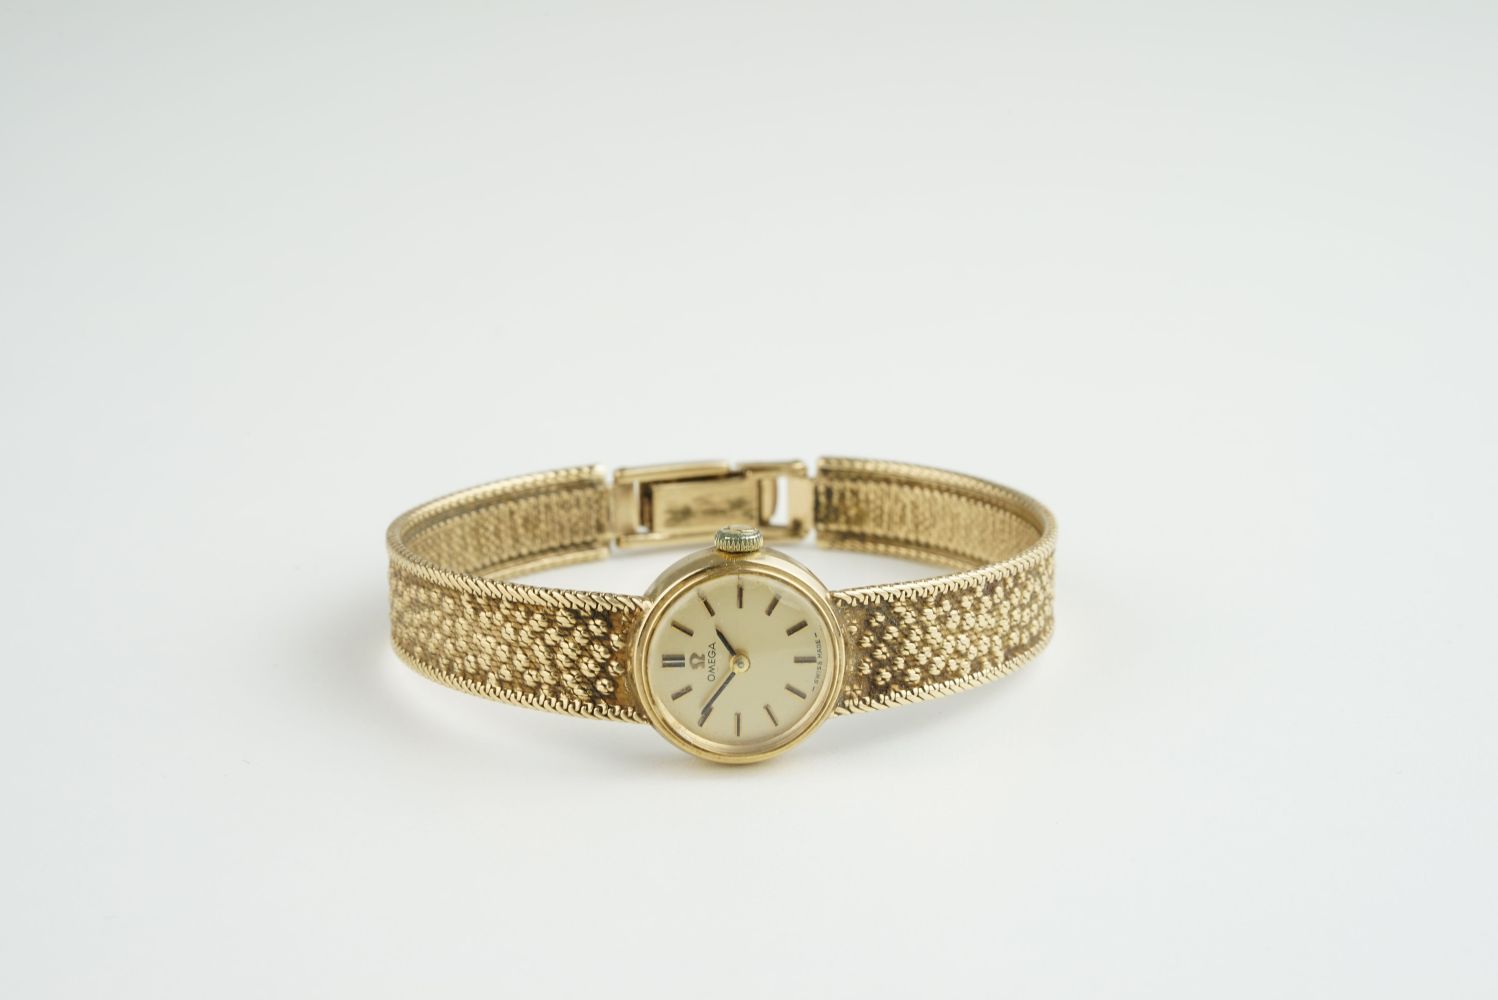 LADIES OMEGA 9CT GOLD COCKTAIL WATCH, circular gold dial with stick hour markers and hands, 17mm 9ct